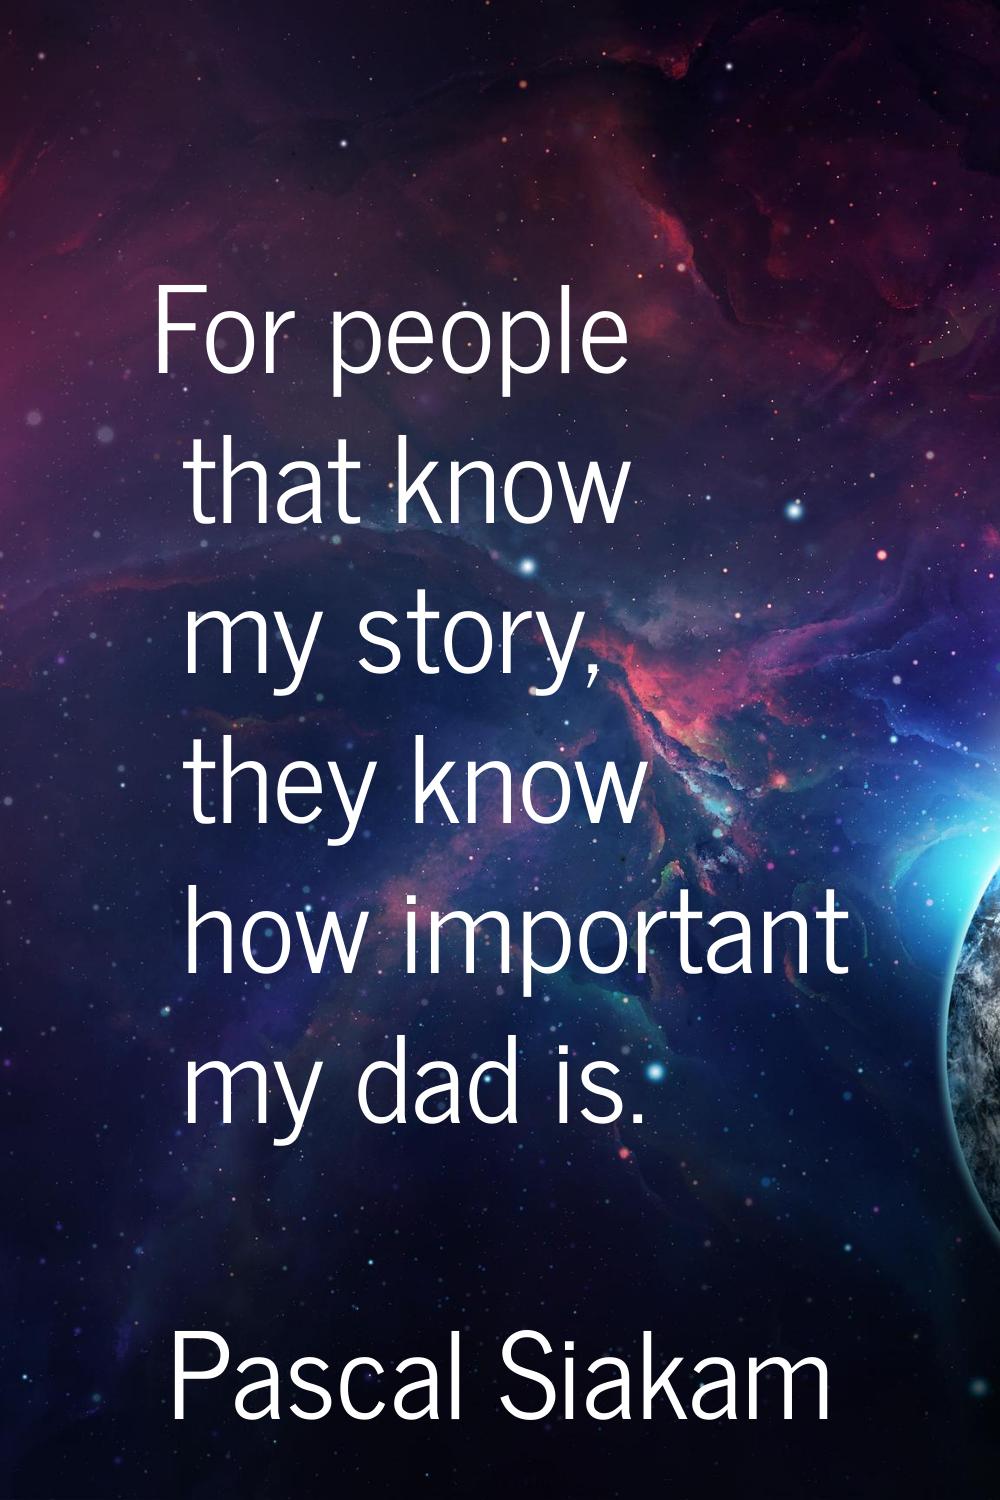 For people that know my story, they know how important my dad is.